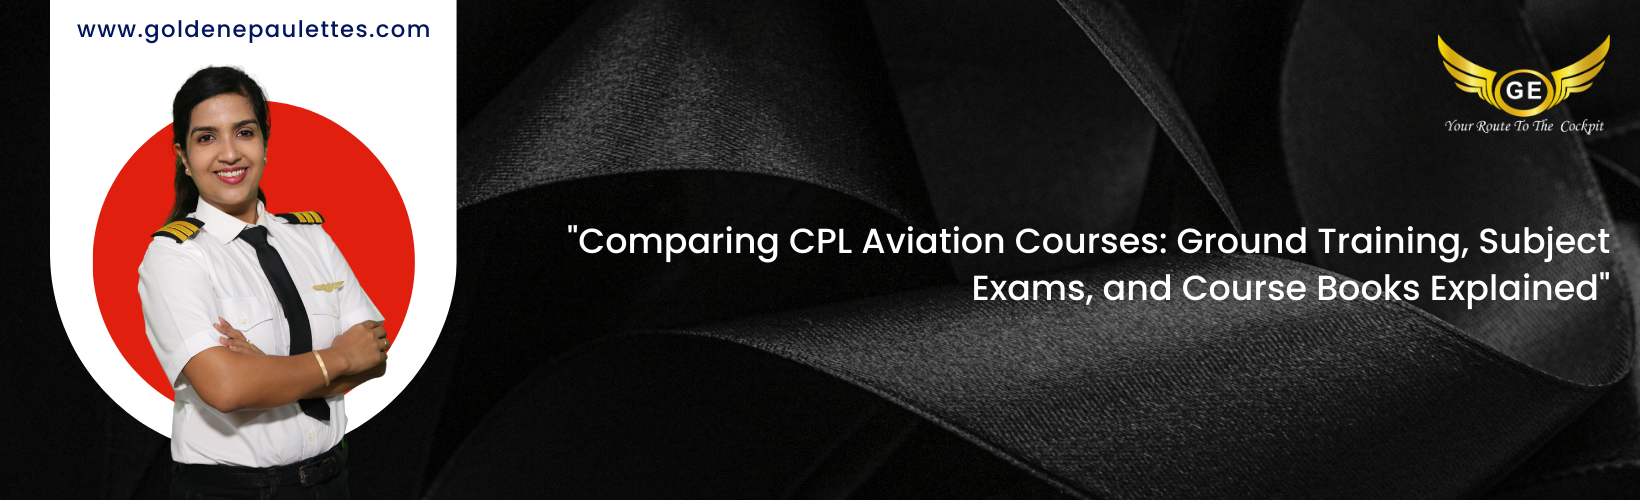 Choosing the Right Aviation Course for Your CPL